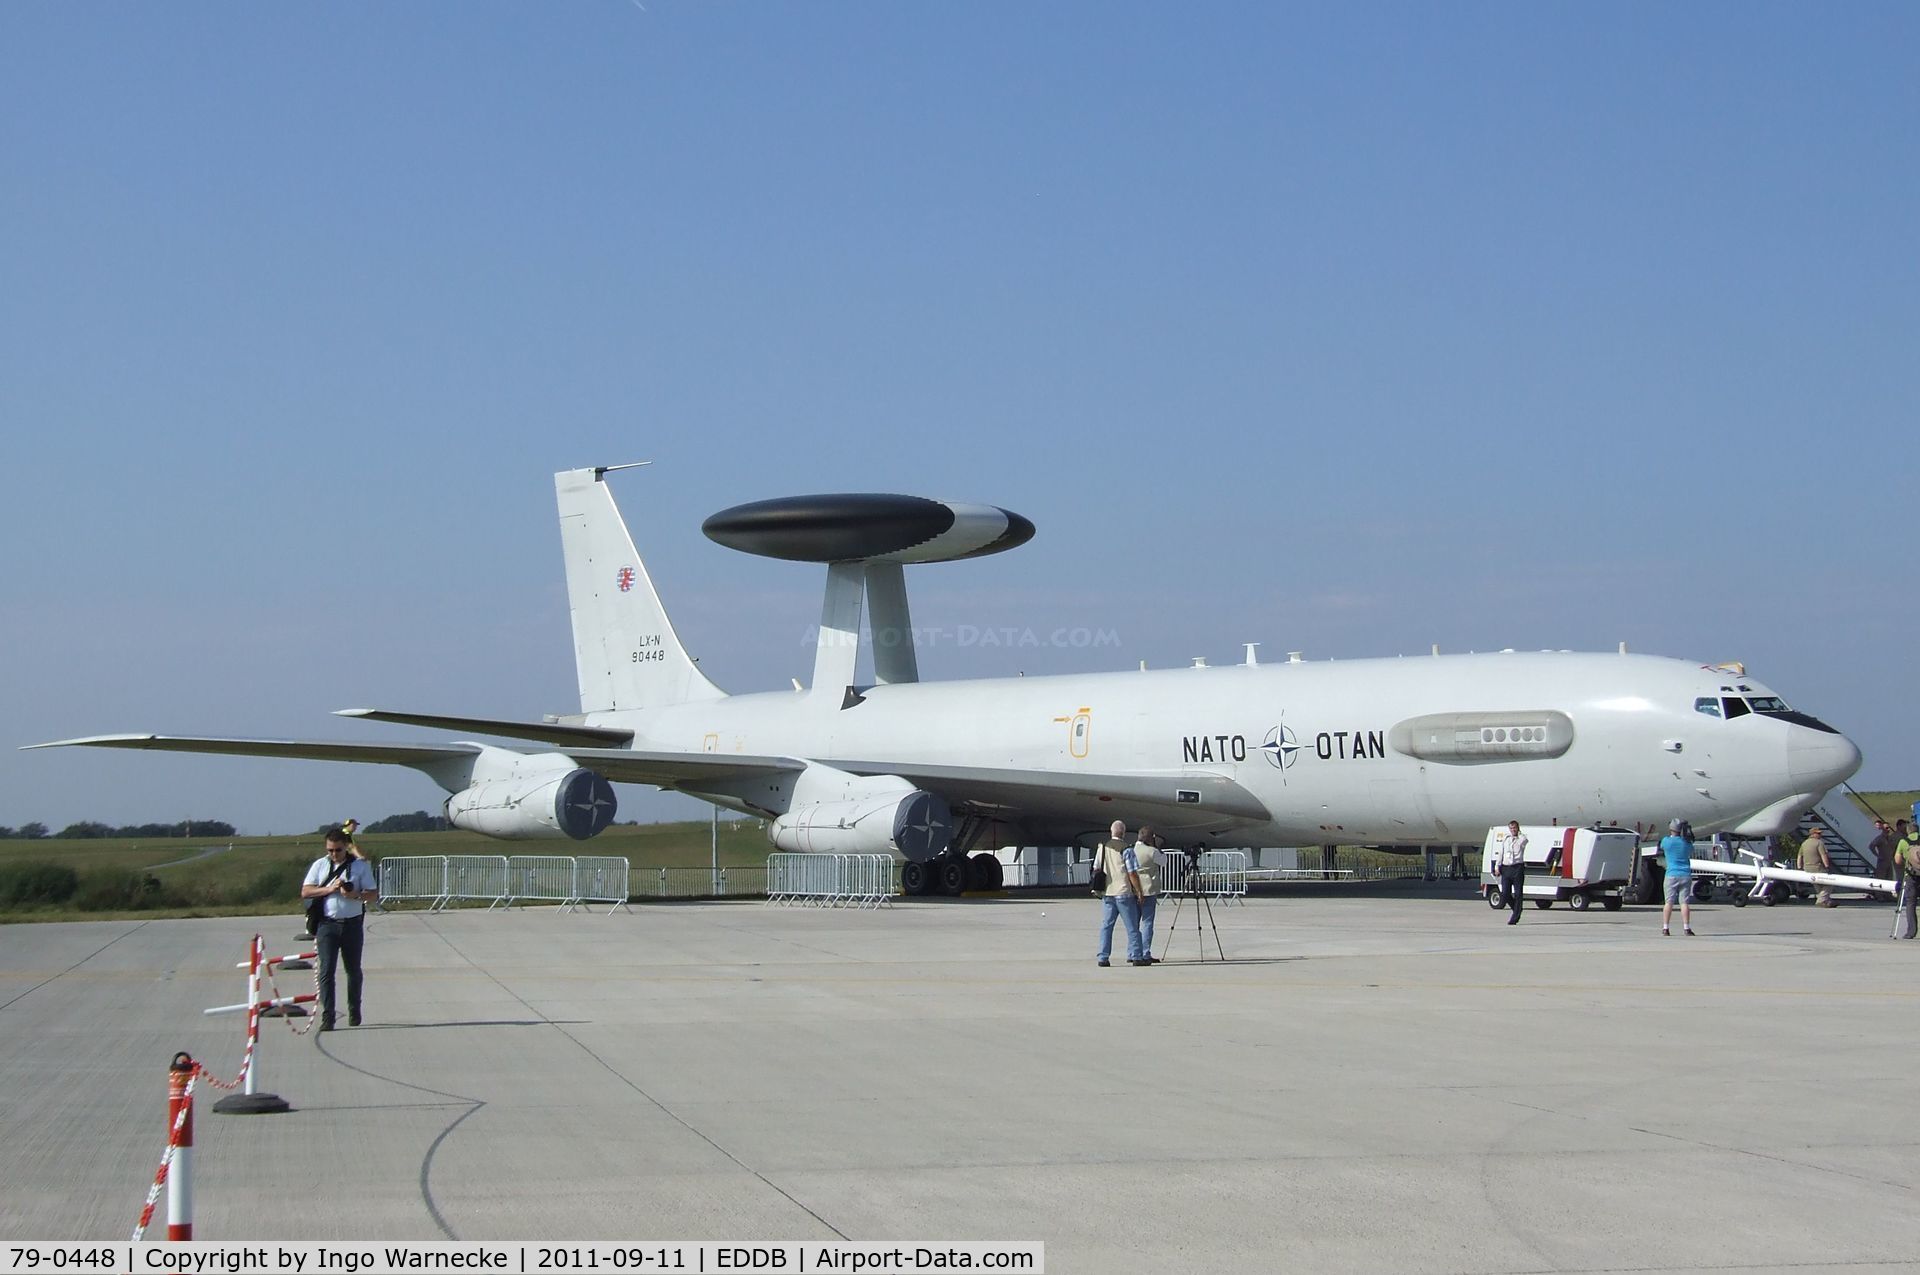 79-0448, 1979 Boeing E-3A Sentry C/N 22844, Boeing E-3A Sentry of the NAEWF at the ILA 2012, Berlin